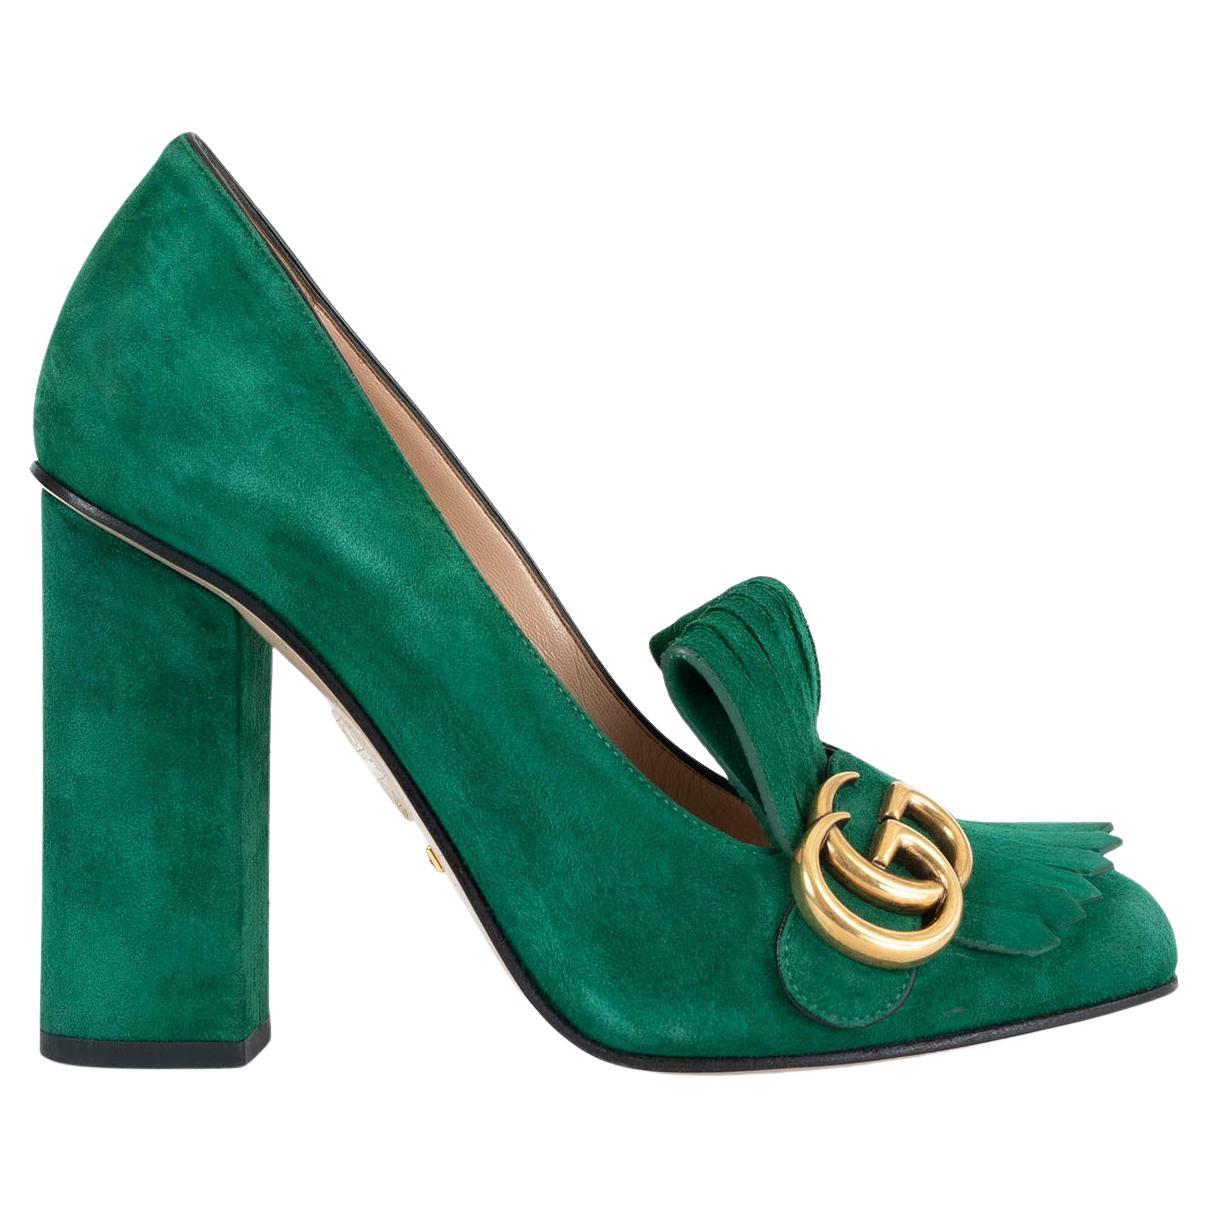 GUCCI emerald green suede GG MARMONT 105 FRINGE Pumps Shoes 38.5